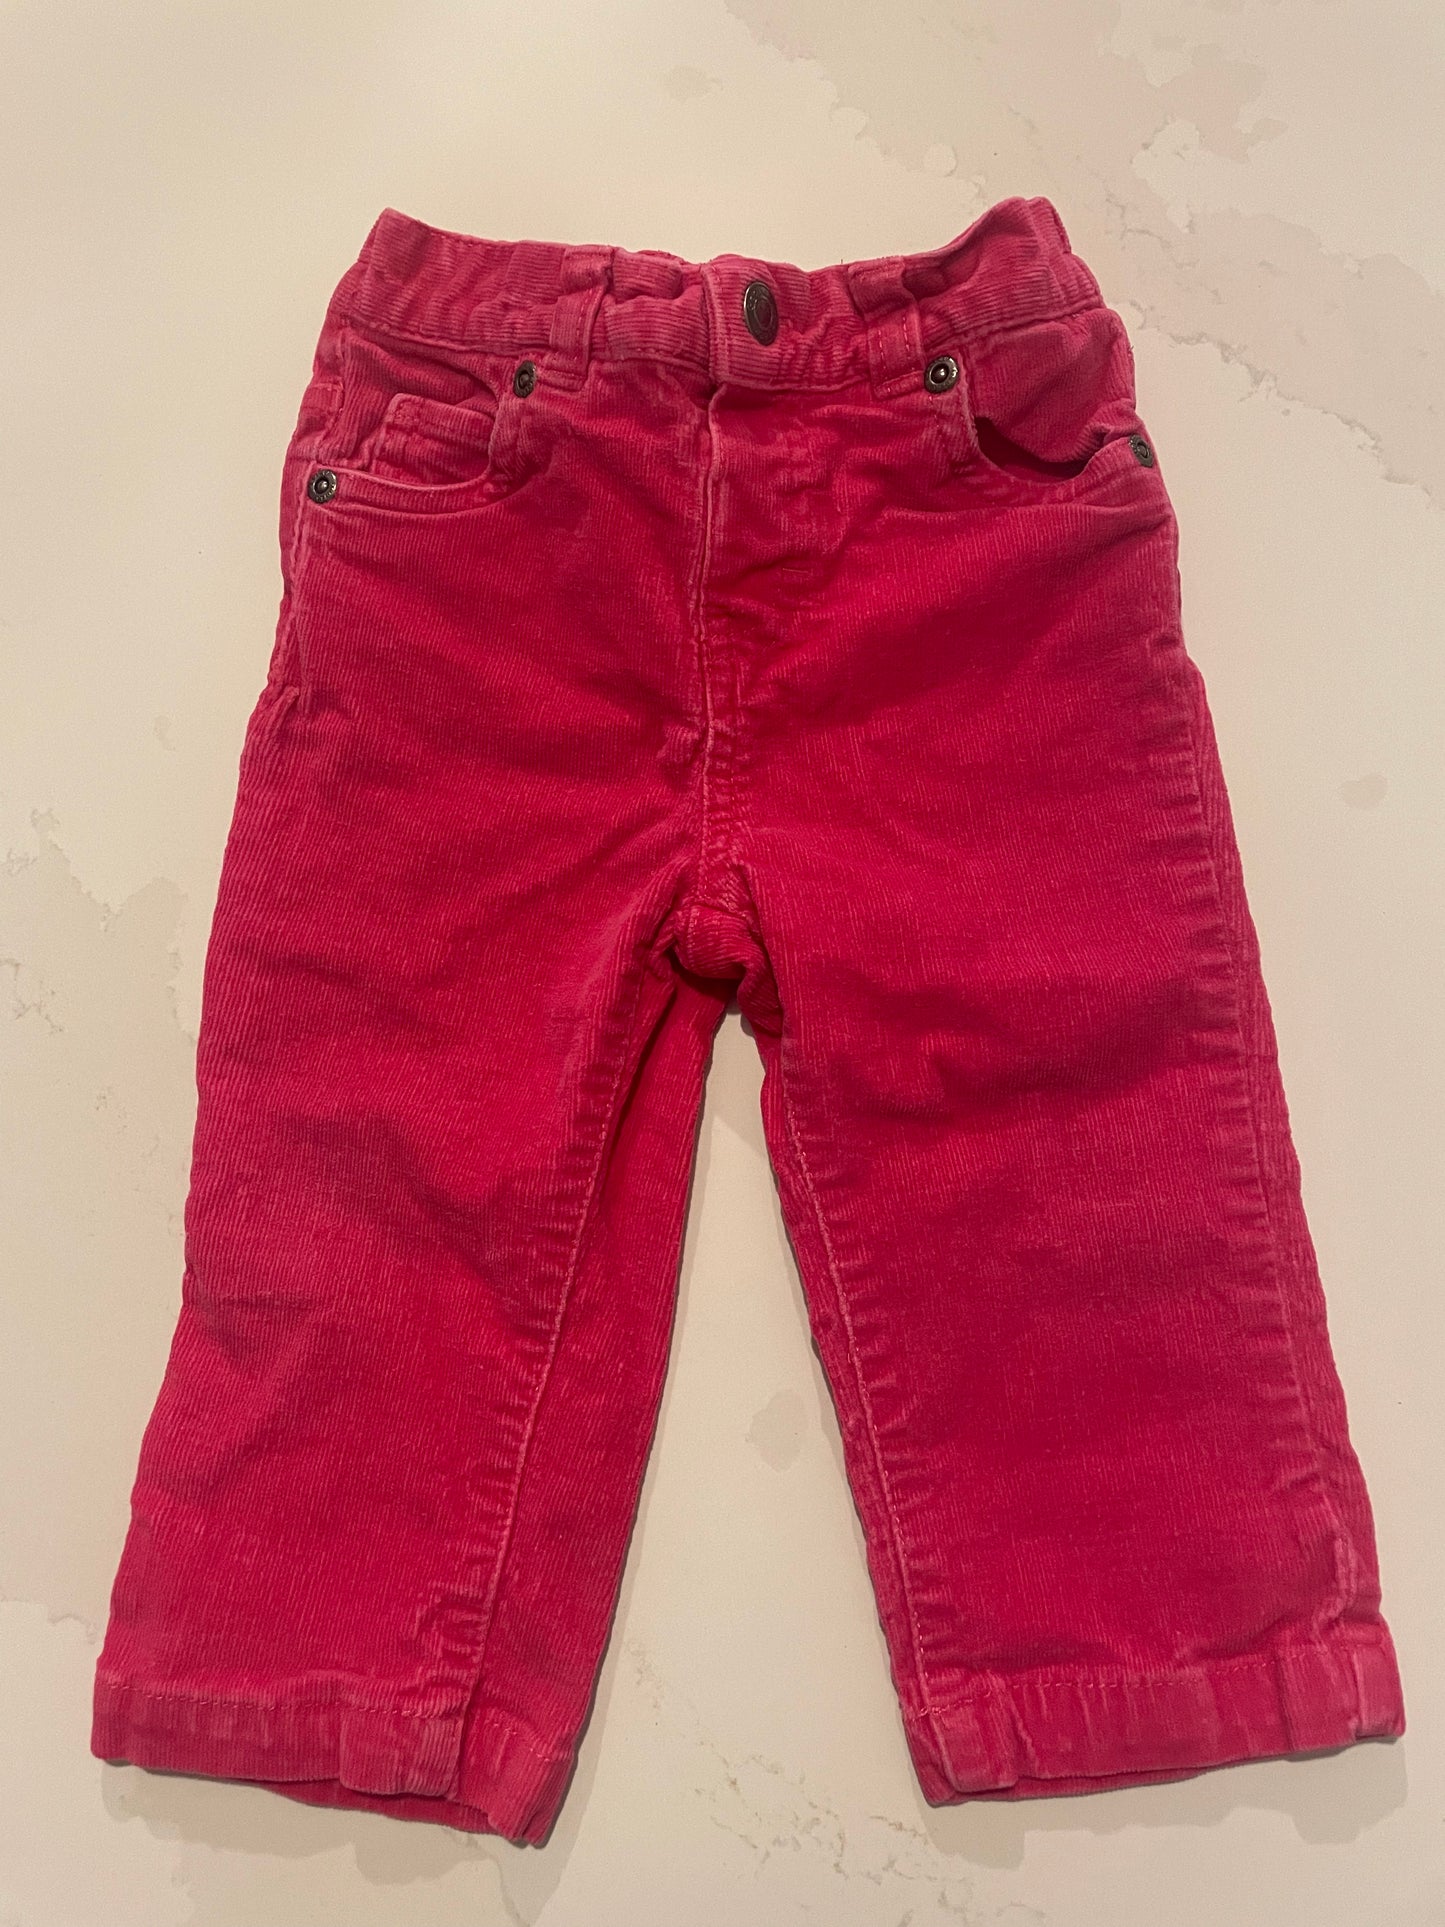 George 6-12 month Cords / Pants